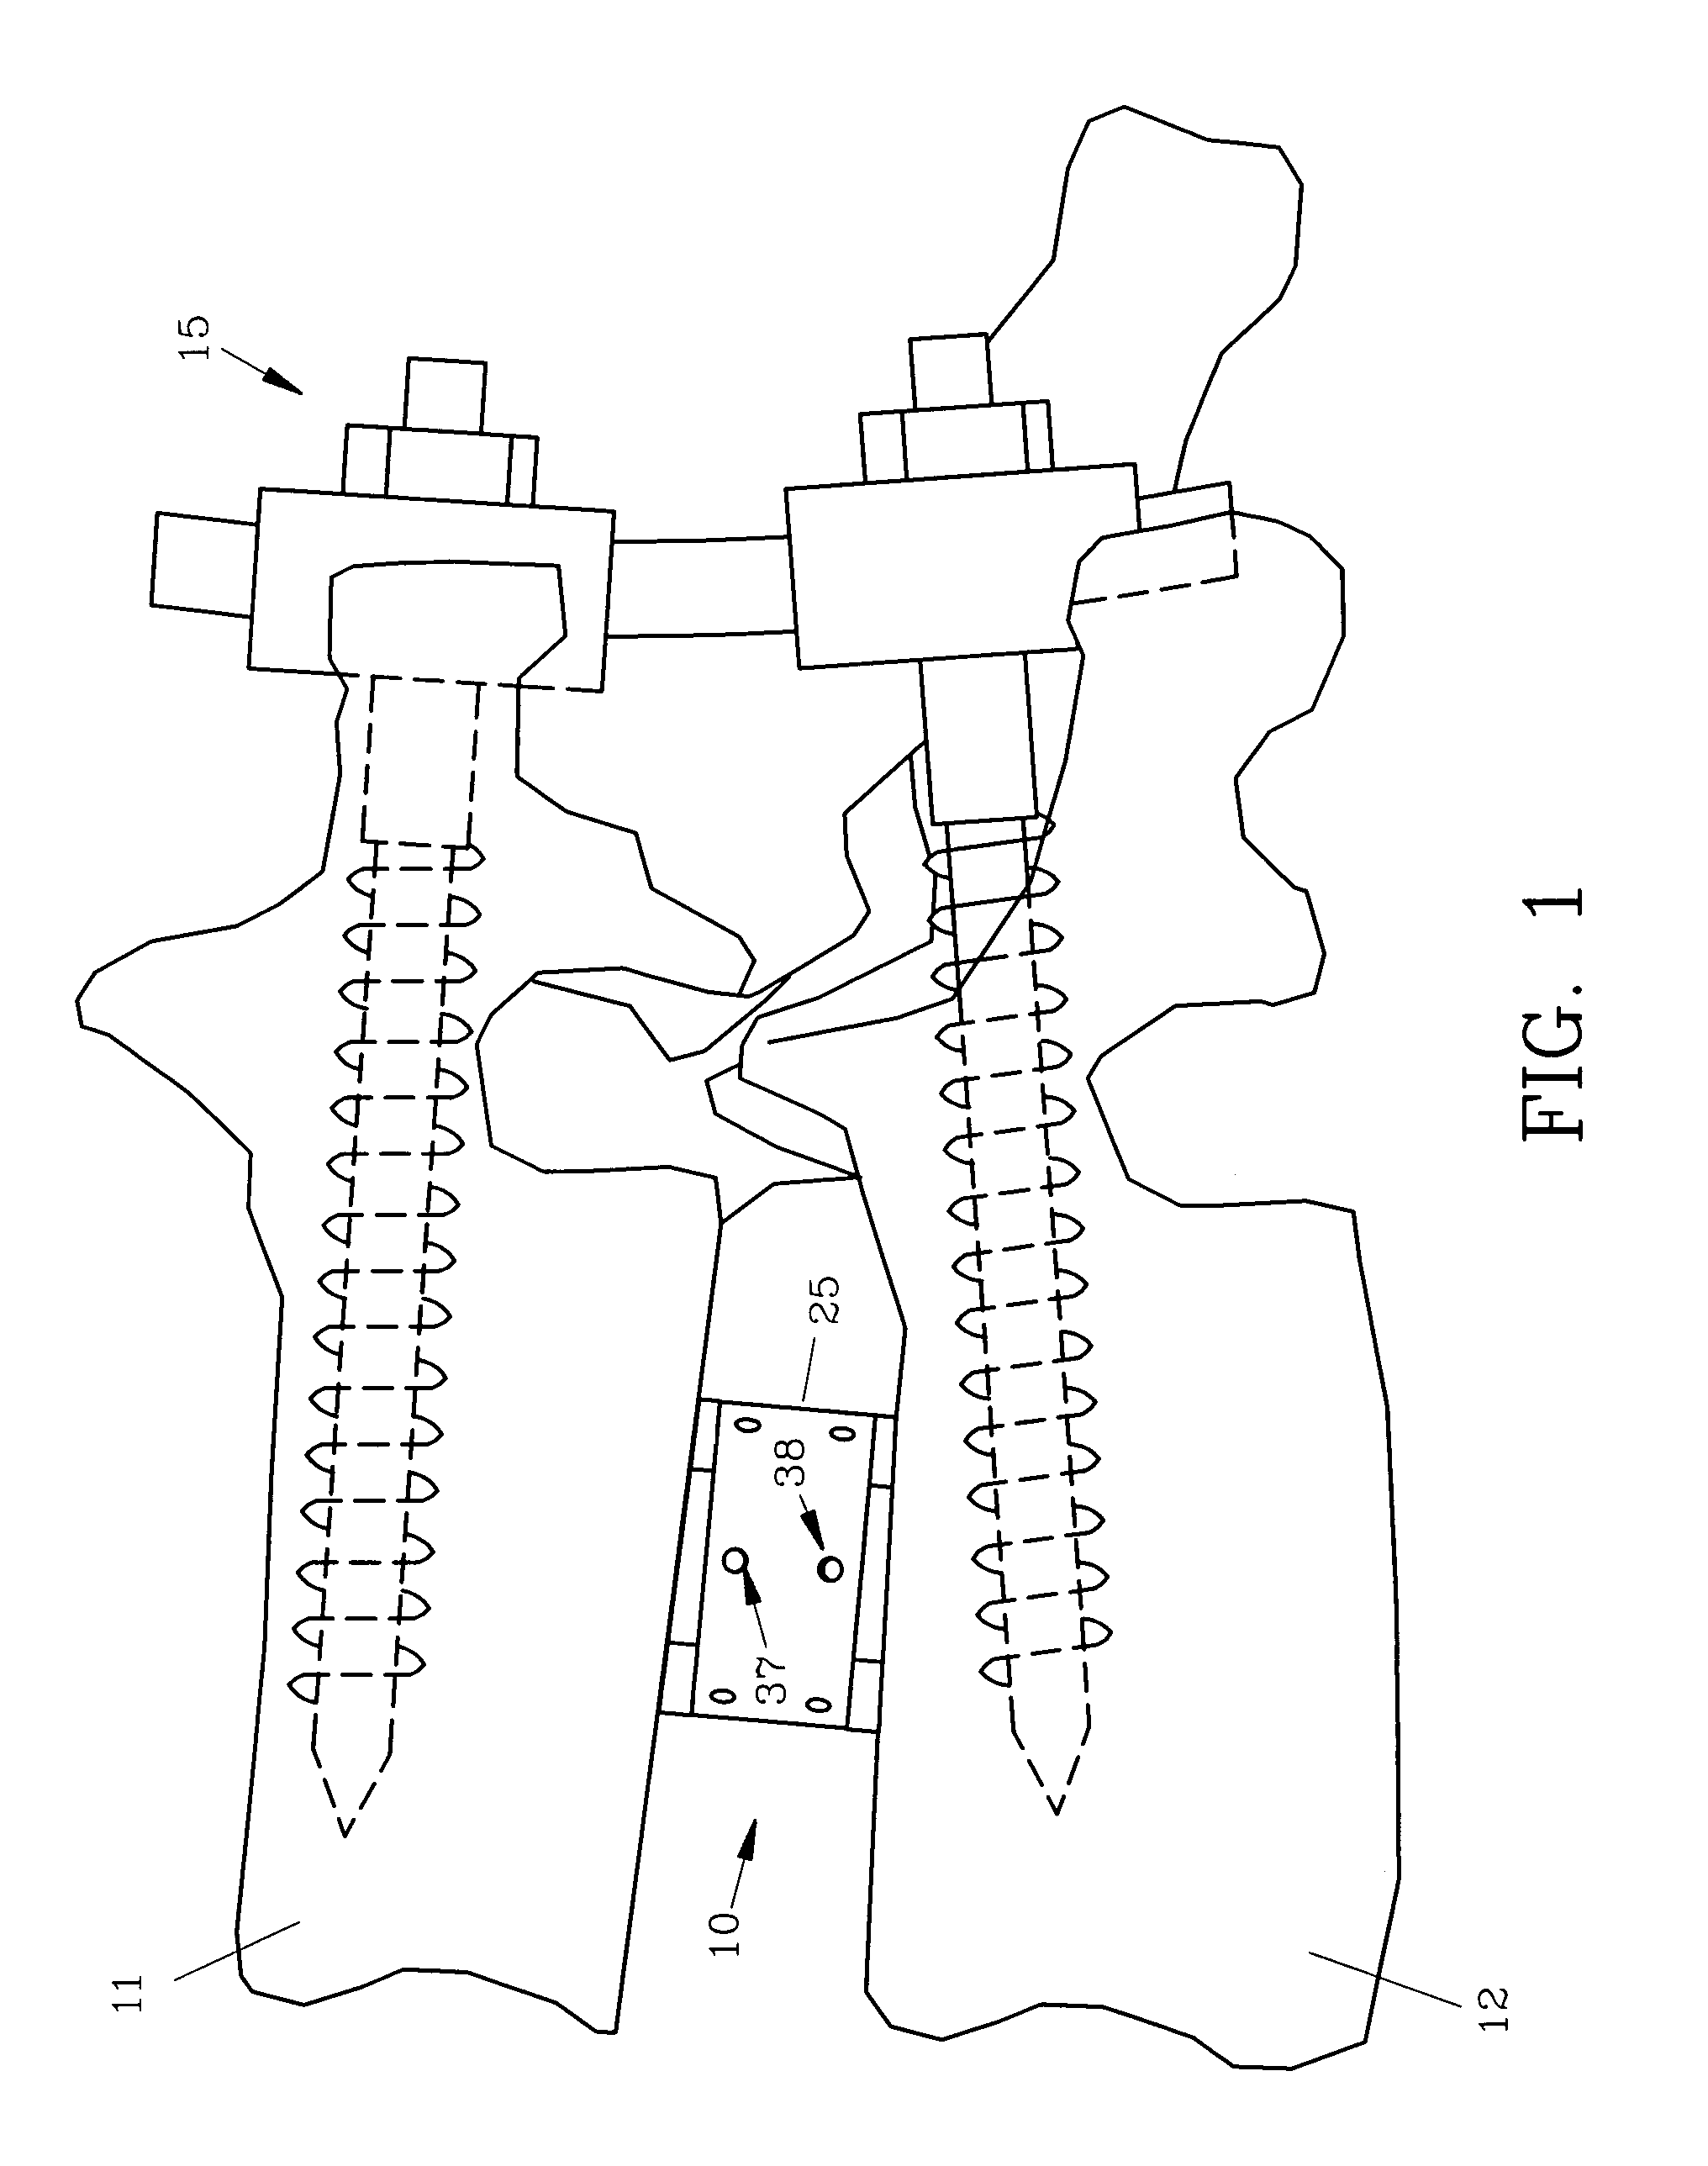 Spinal interbody fusion device and method